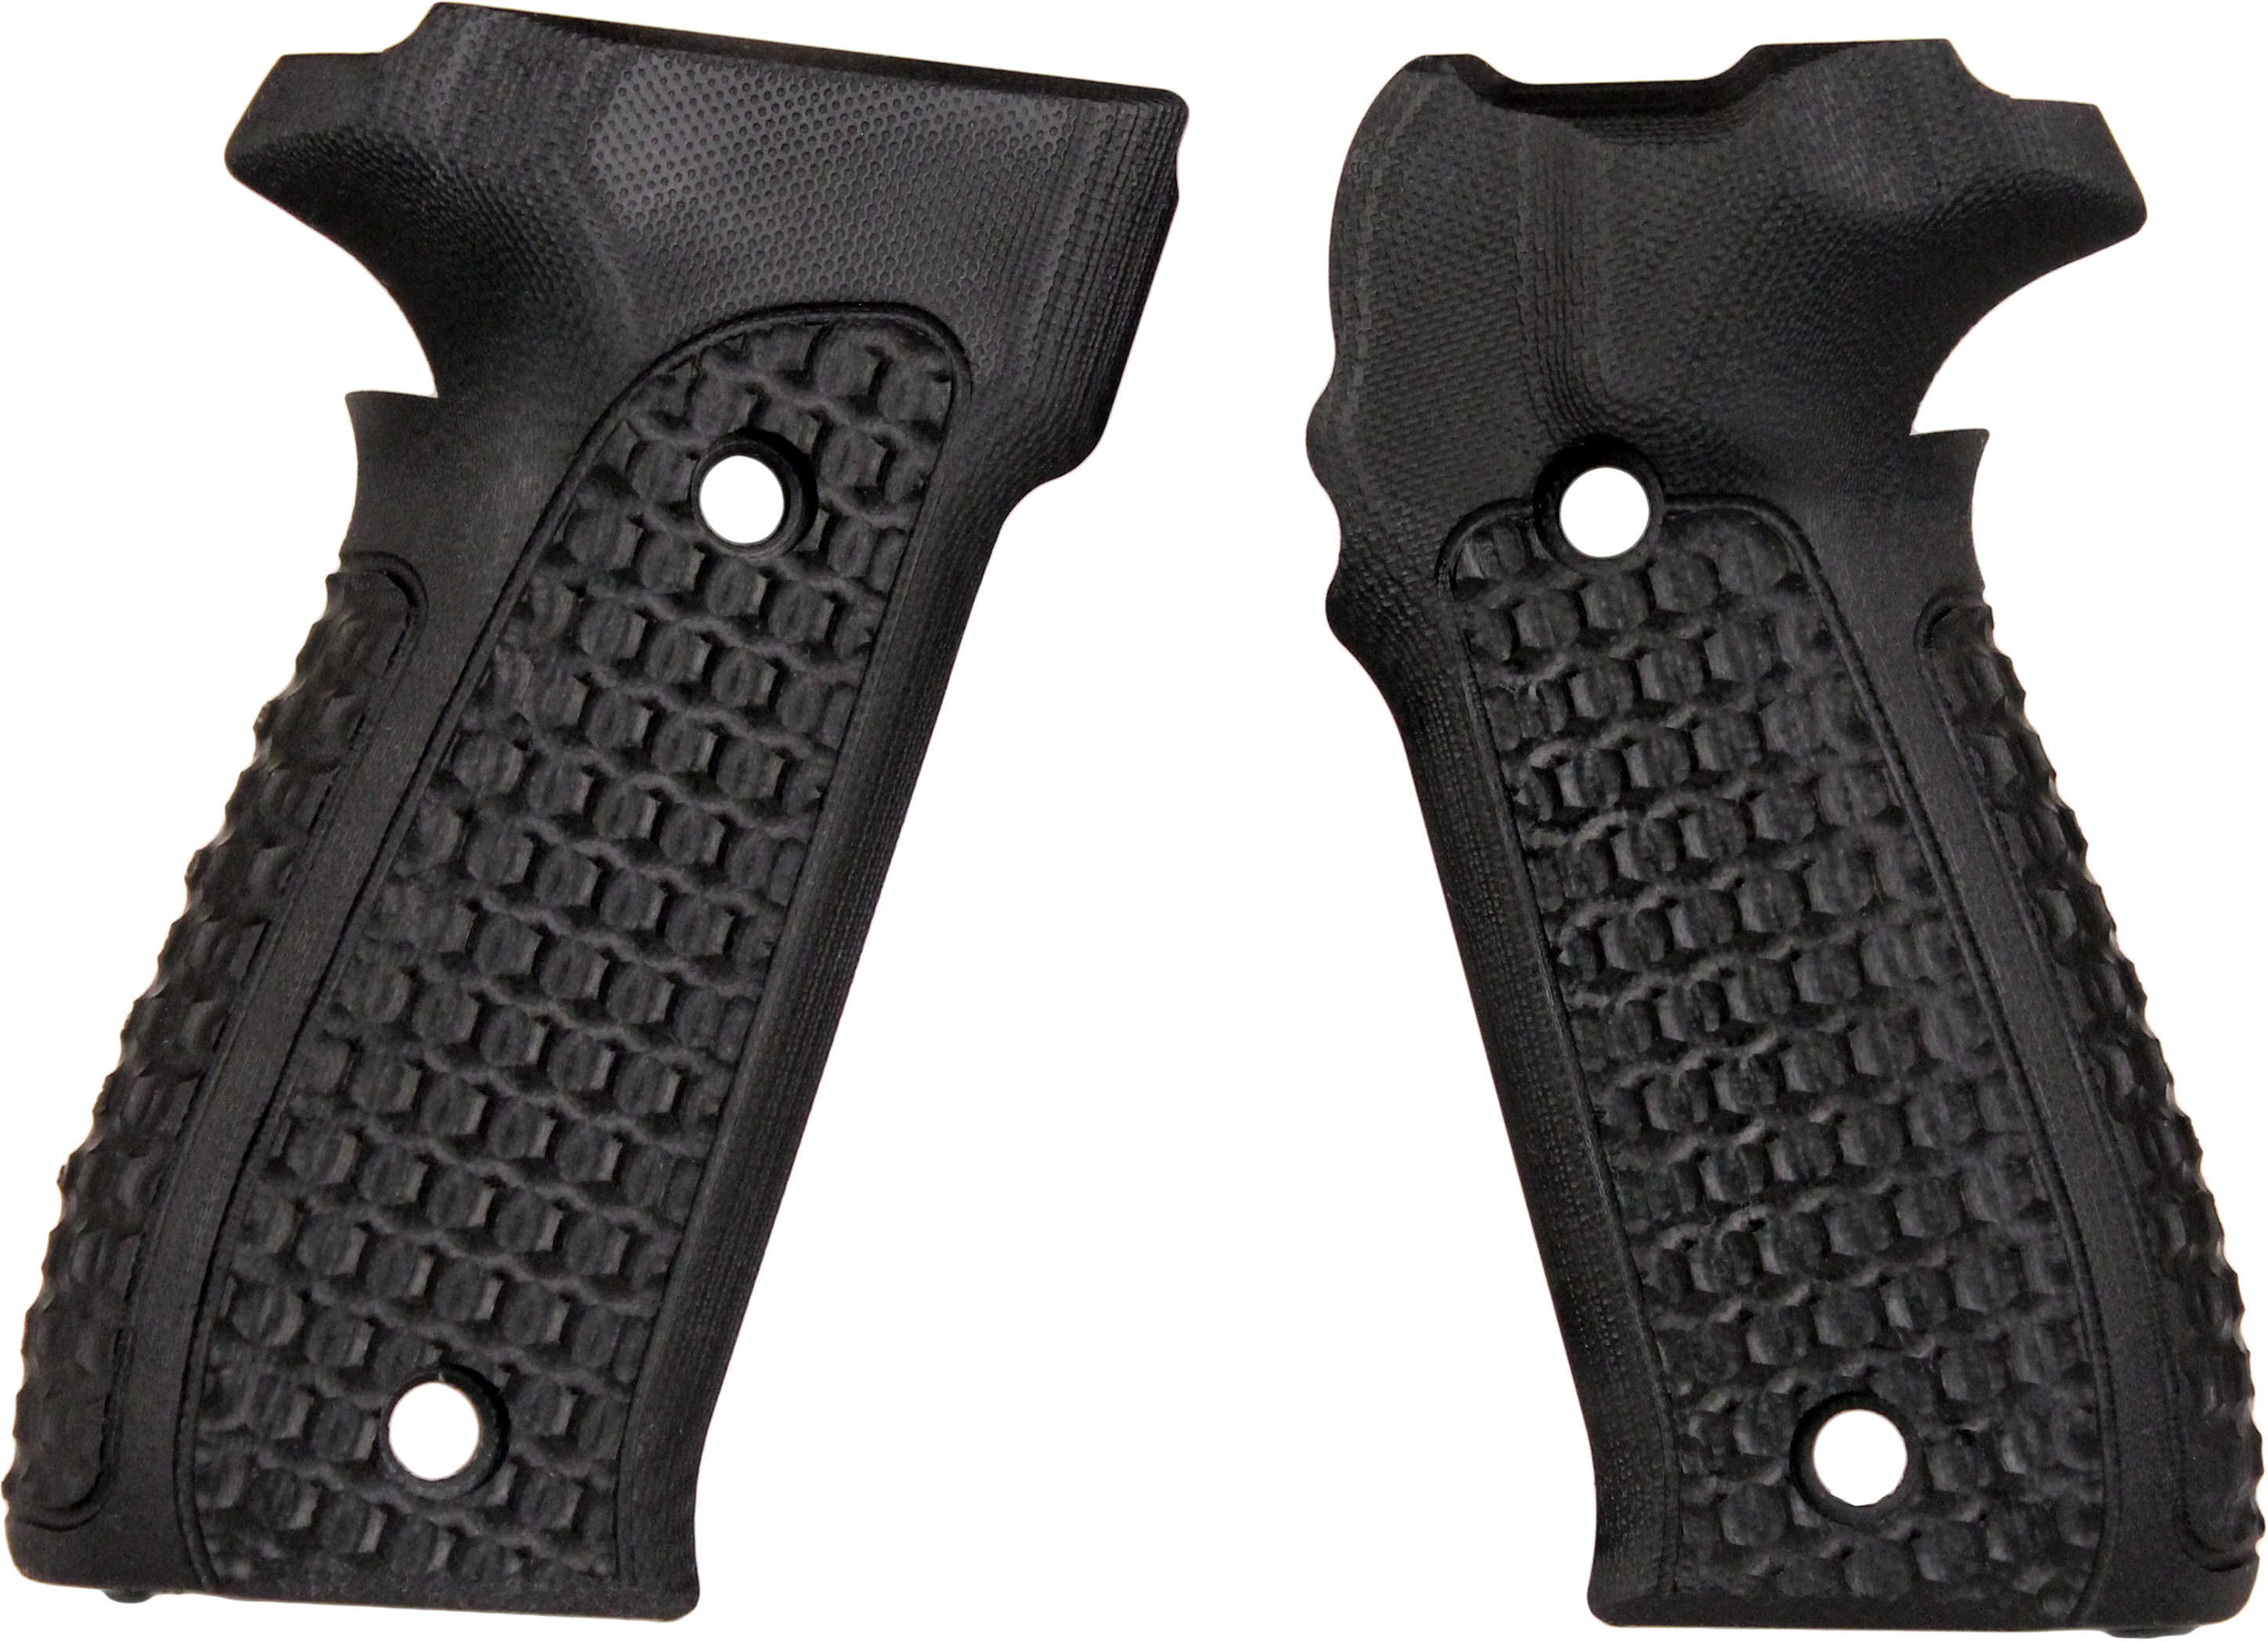 Hogue Sig P226 Grips Chain Link G-10 Solid Black 26119